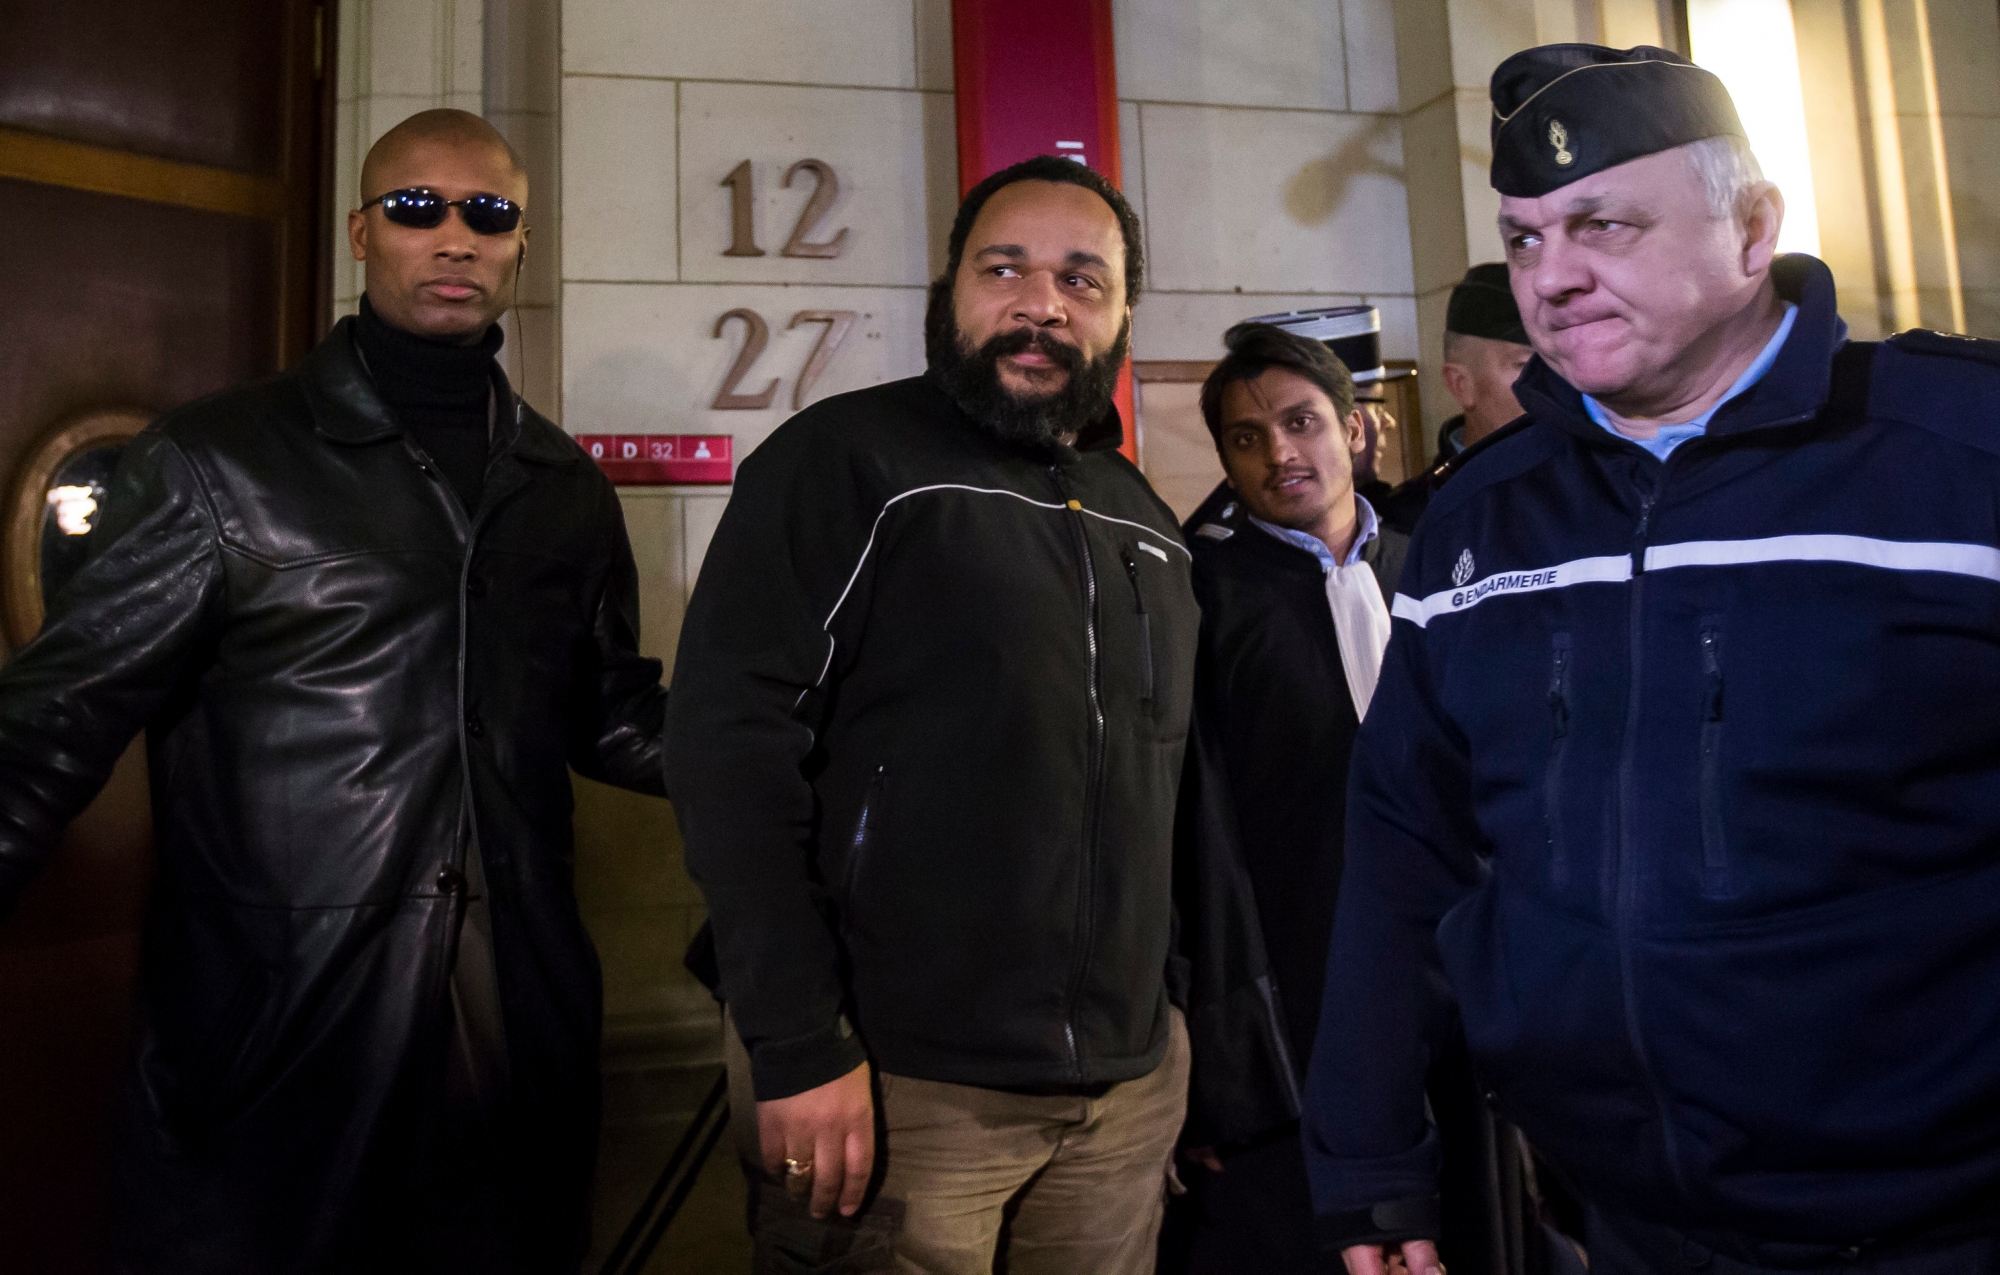 epa04603754 French comedian Dieudonne M'Bala M'Bala (C) exits the courtroom after his trial at the Court House, in Paris, France, 04 February 2015. Controversial comedian Dieudonne M'Bala M'Bala stands trial on charges of advocating terrorism after posting on a social network profile the comment 'I feel like Charlie Coulibaly', in reference to the 'I am Charlie' slogan made popular in the wake of the 07 January terror attack on the satirical Charlie Hebdo newspaper headquarters in Paris. The comment appeared to support one of the three gunmen, Amedy Coulibaly.  EPA/IAN LANGSDON FRANCE TRIALS